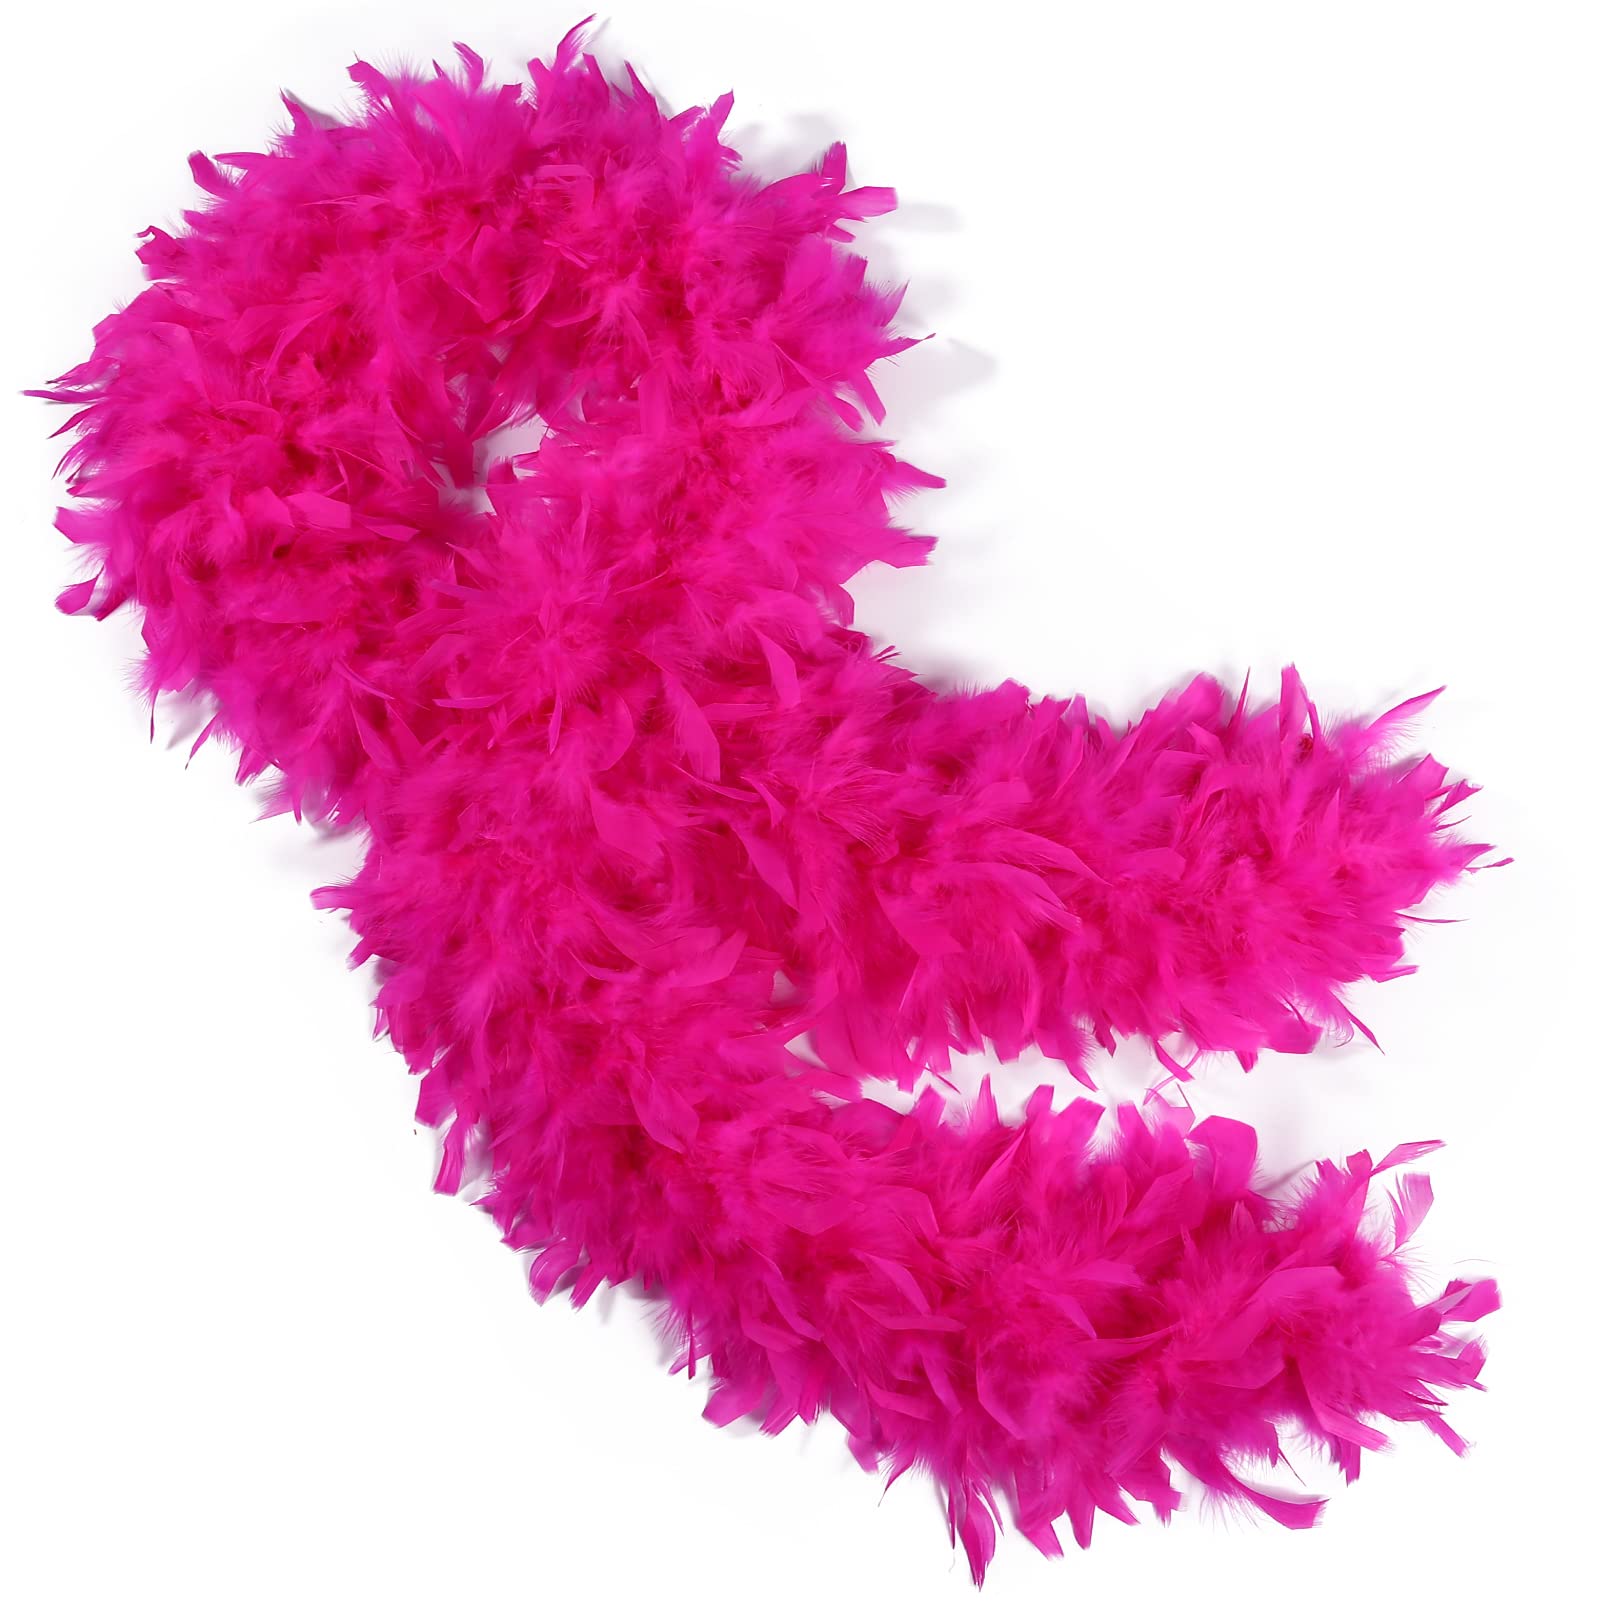 THARAHT Hot pink Chandelle Turkey Feather Boa 2 Yards 60g for DIY Craft  Home Dancing Wedding Party Halloween Costume Decoration Feather Boa 60g Hot  Pink